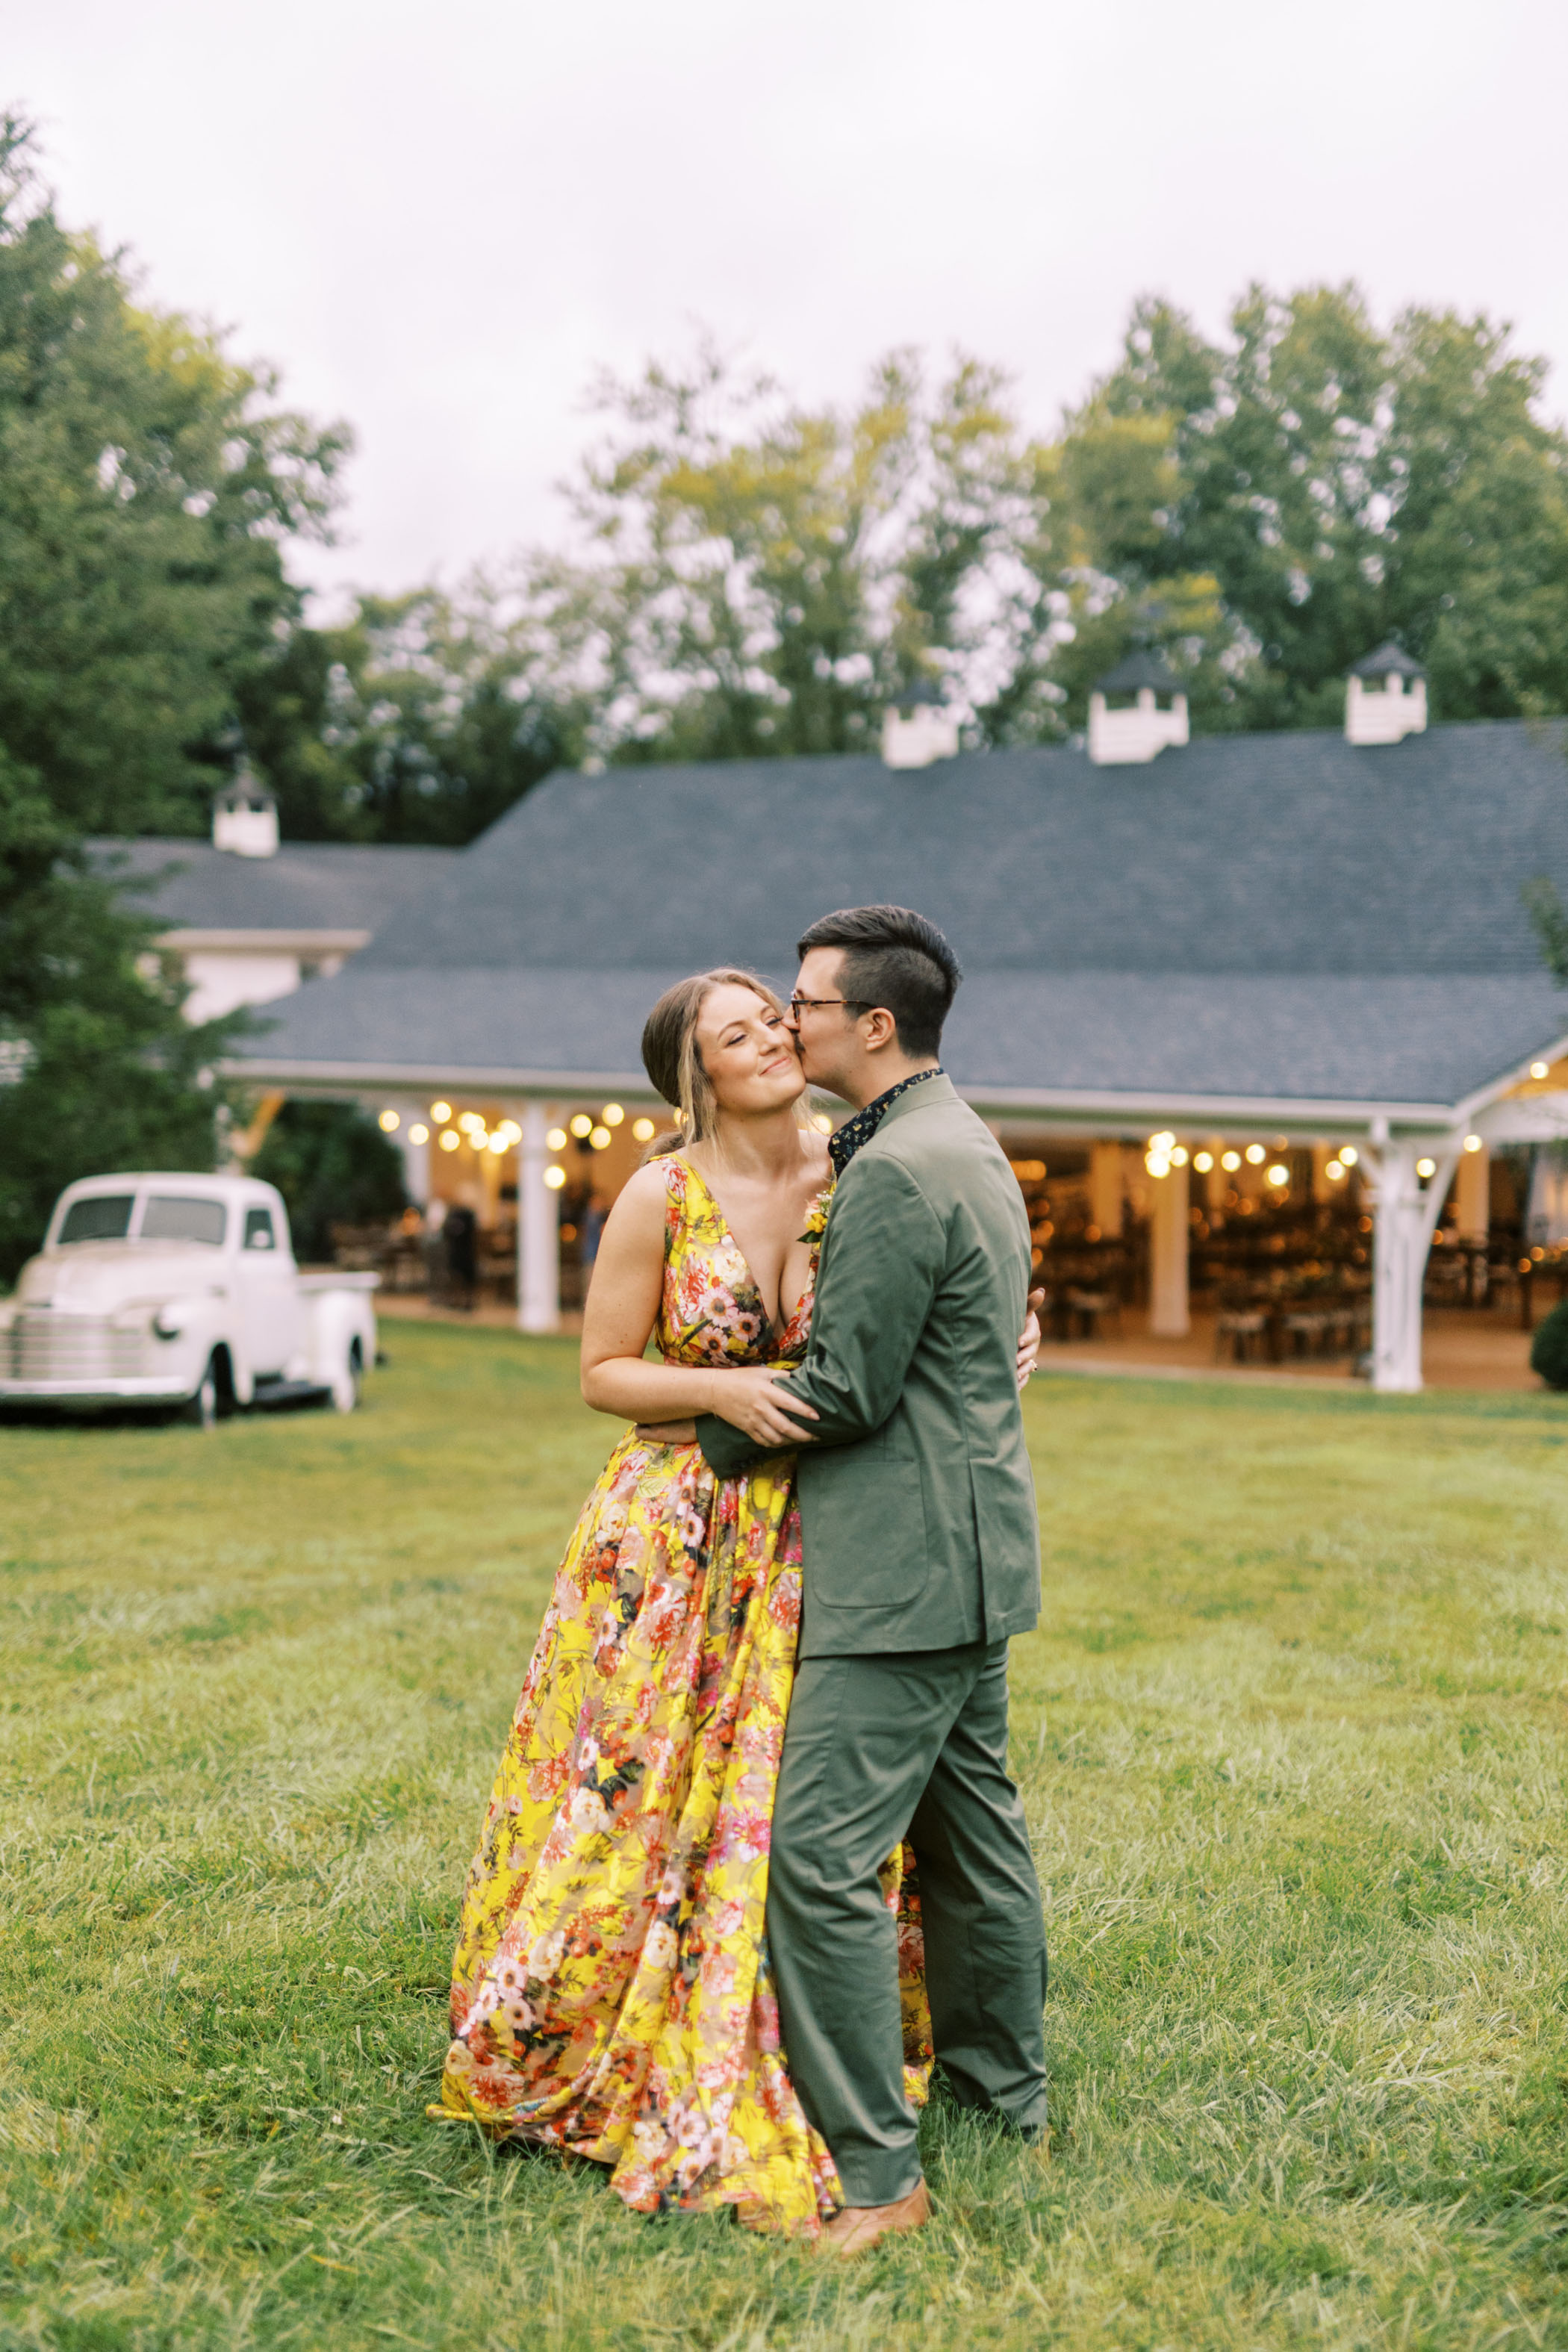 A Yellow Wedding Dress Changed the Course of This Tennessee Wedding